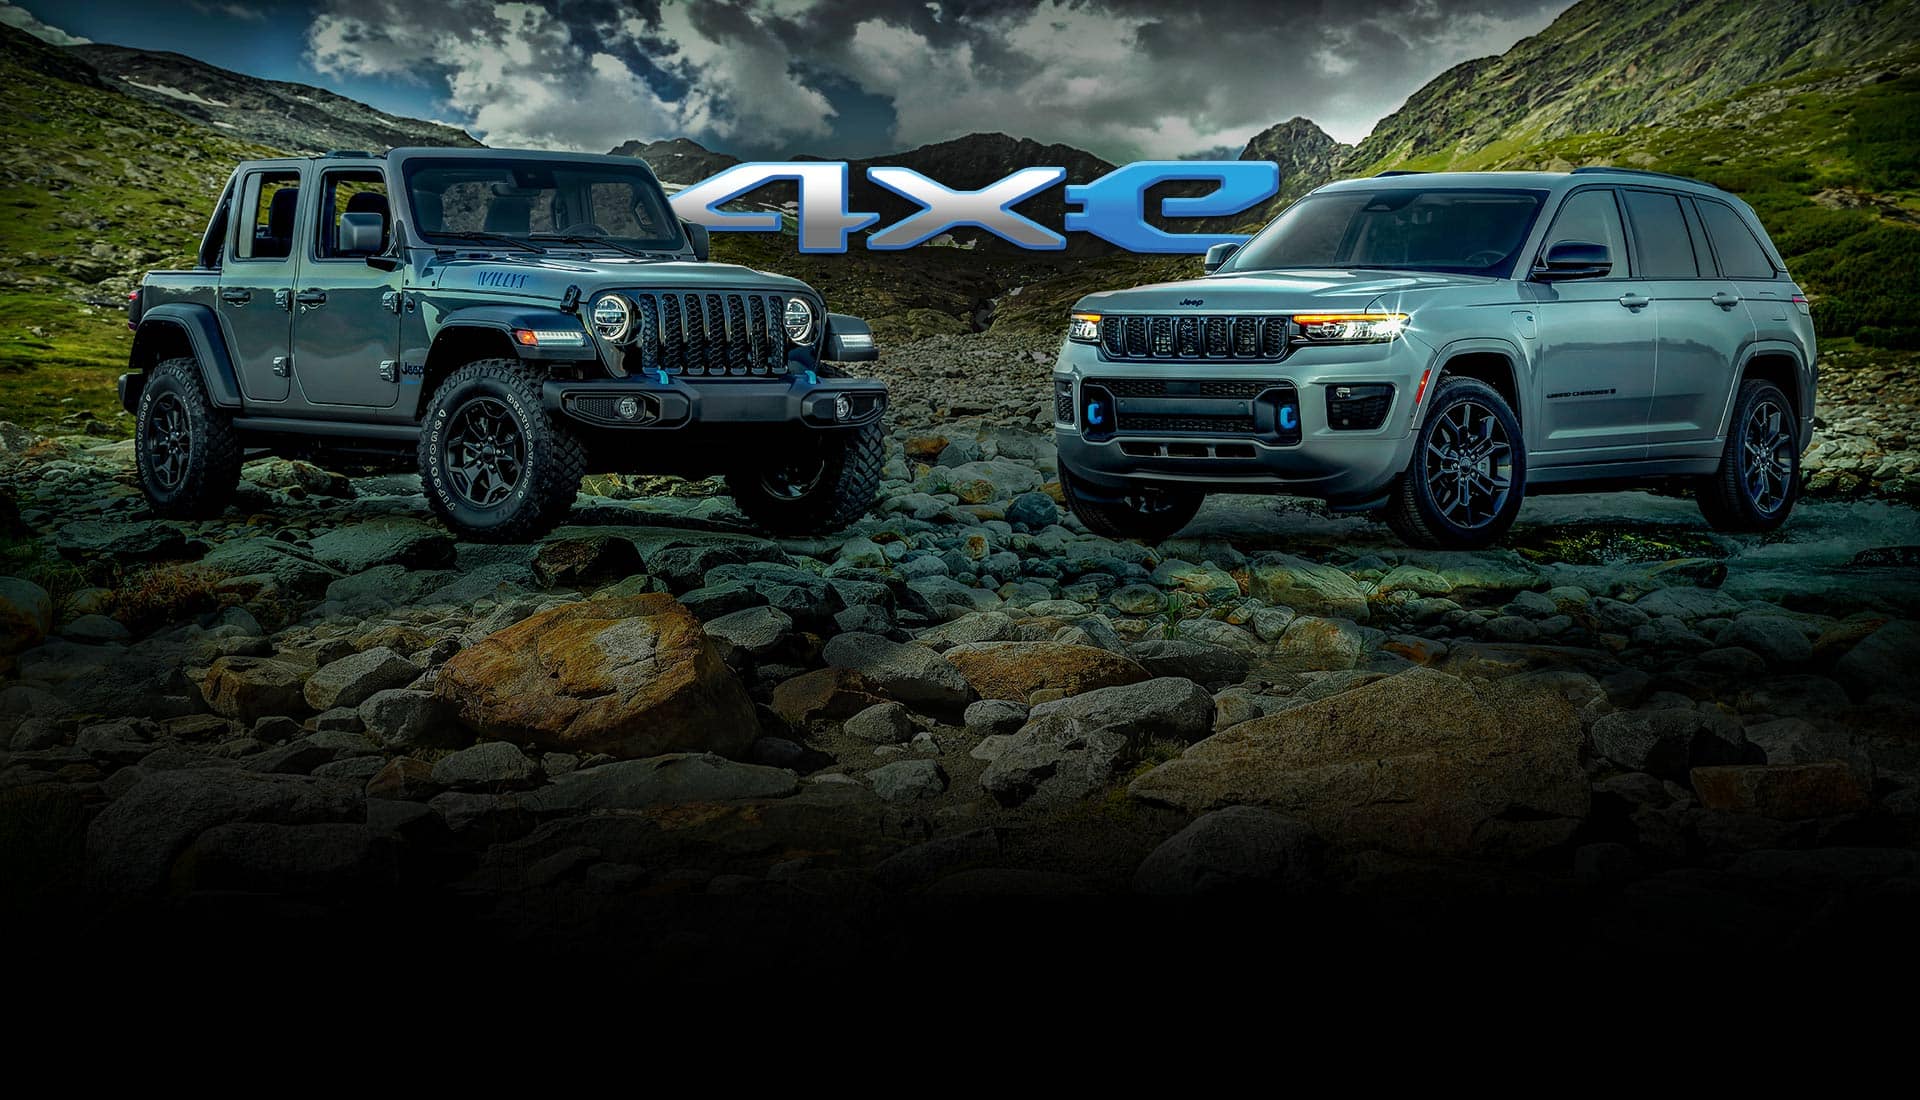 4xe. A 2023 Jeep Wrangler Willys 4xe and 2023 Jeep Grand Cherokee 30th Anniversary Edition 4xe parked on a rocky ridge with mountains and a stormy sky in the background.